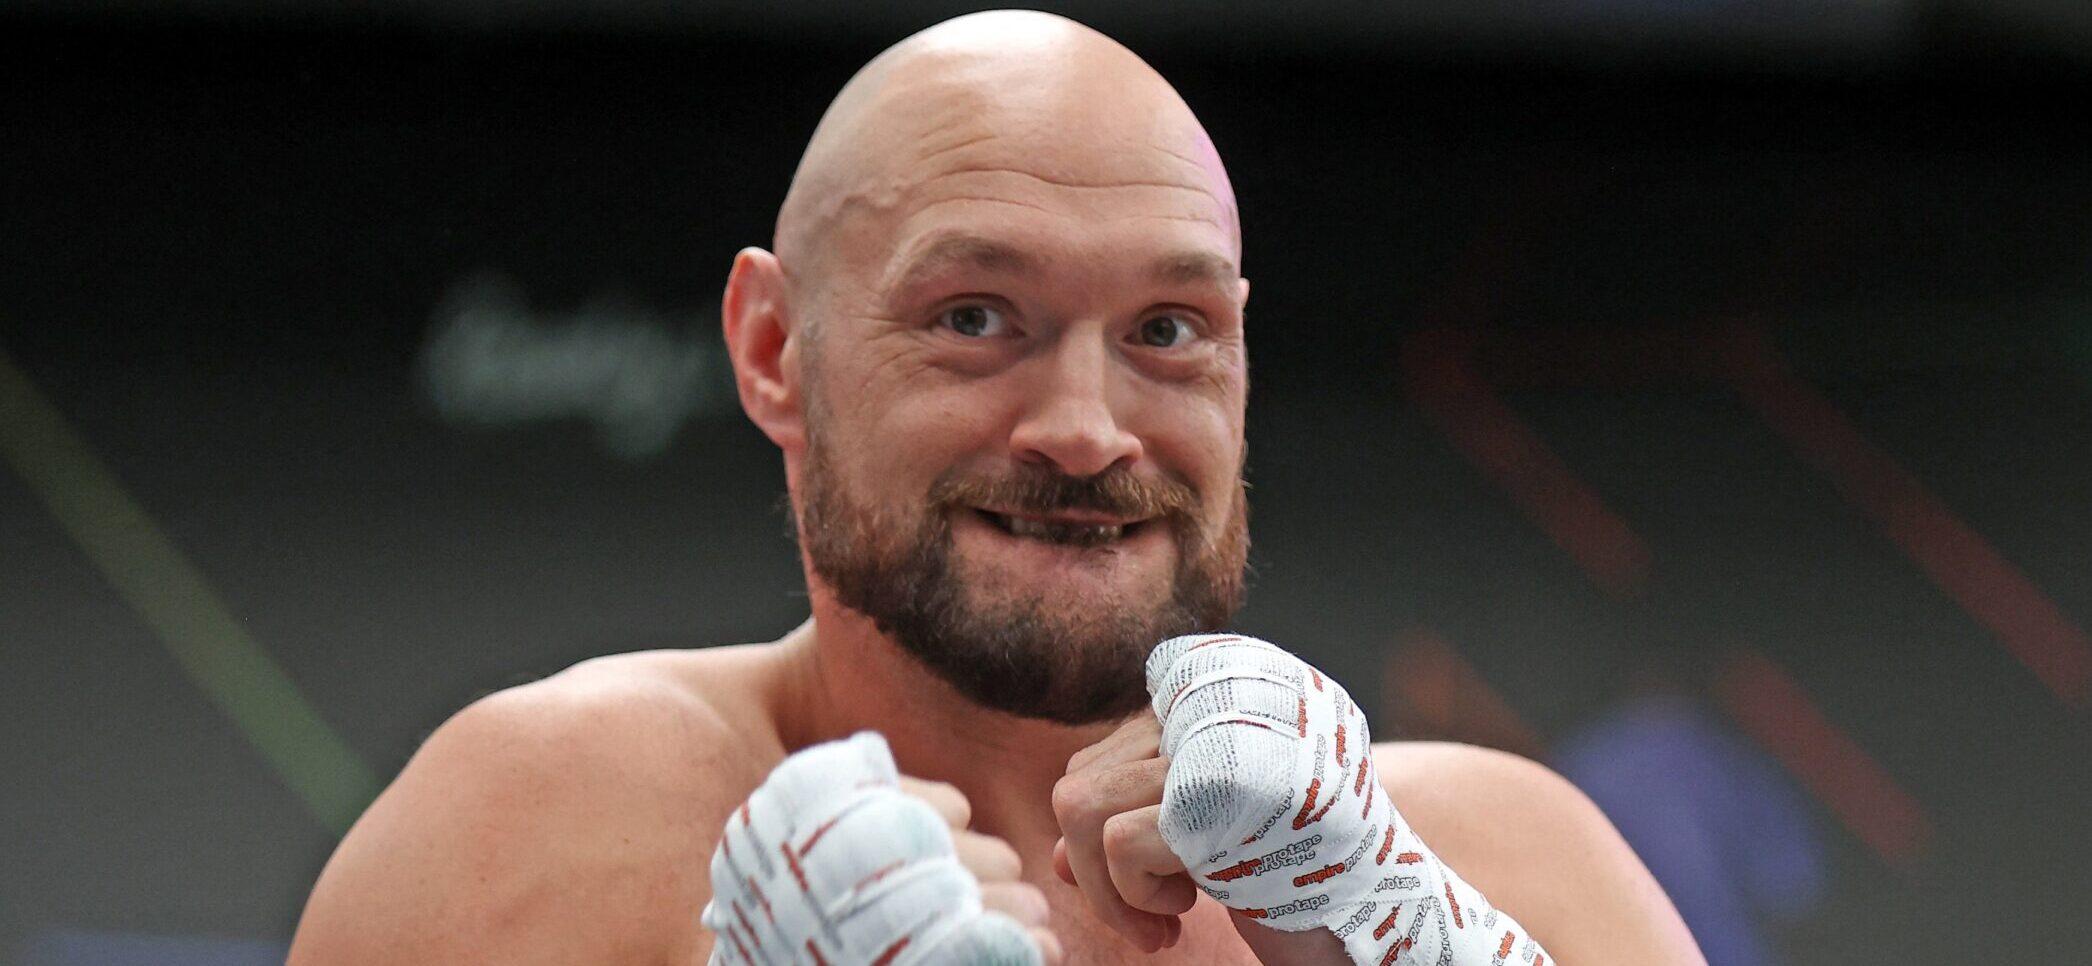 Tyson Fury Expands Family With 7th ‘Perfect’ Child